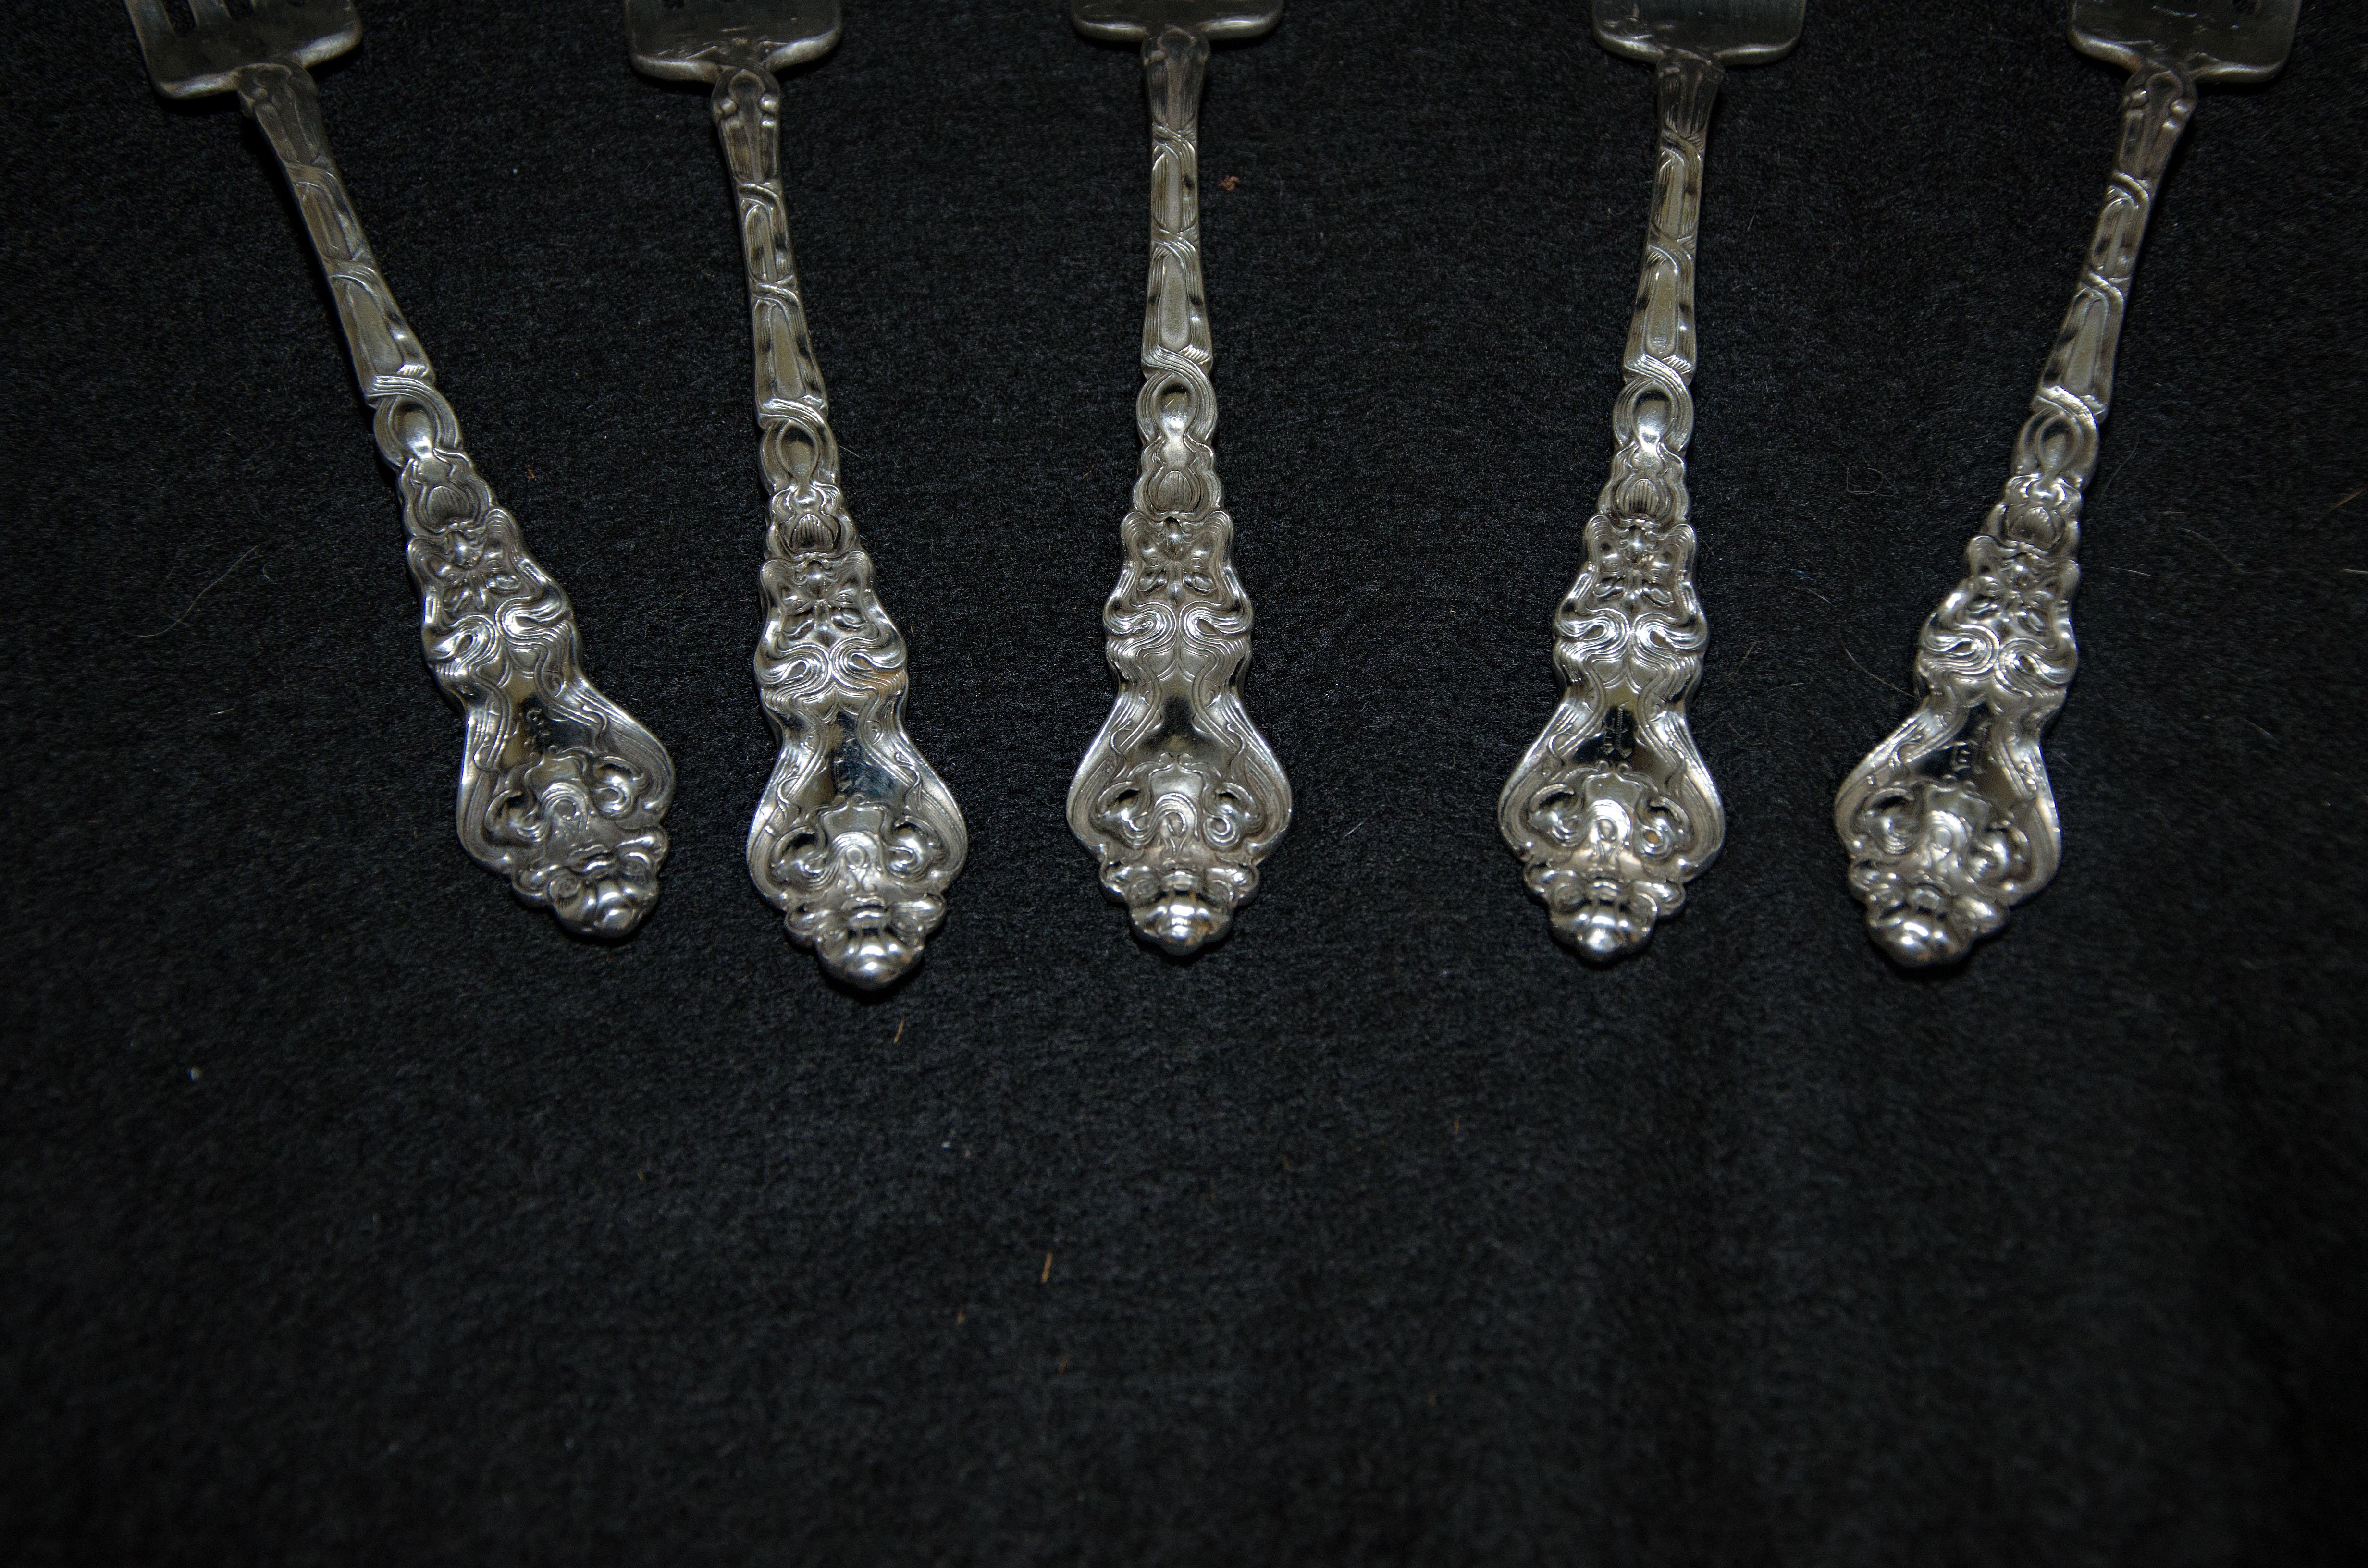 Douvaine by Unger Brothers Art Nouveau Sterling Silver Flatware 75 Pieces In Good Condition For Sale In Crockett, CA